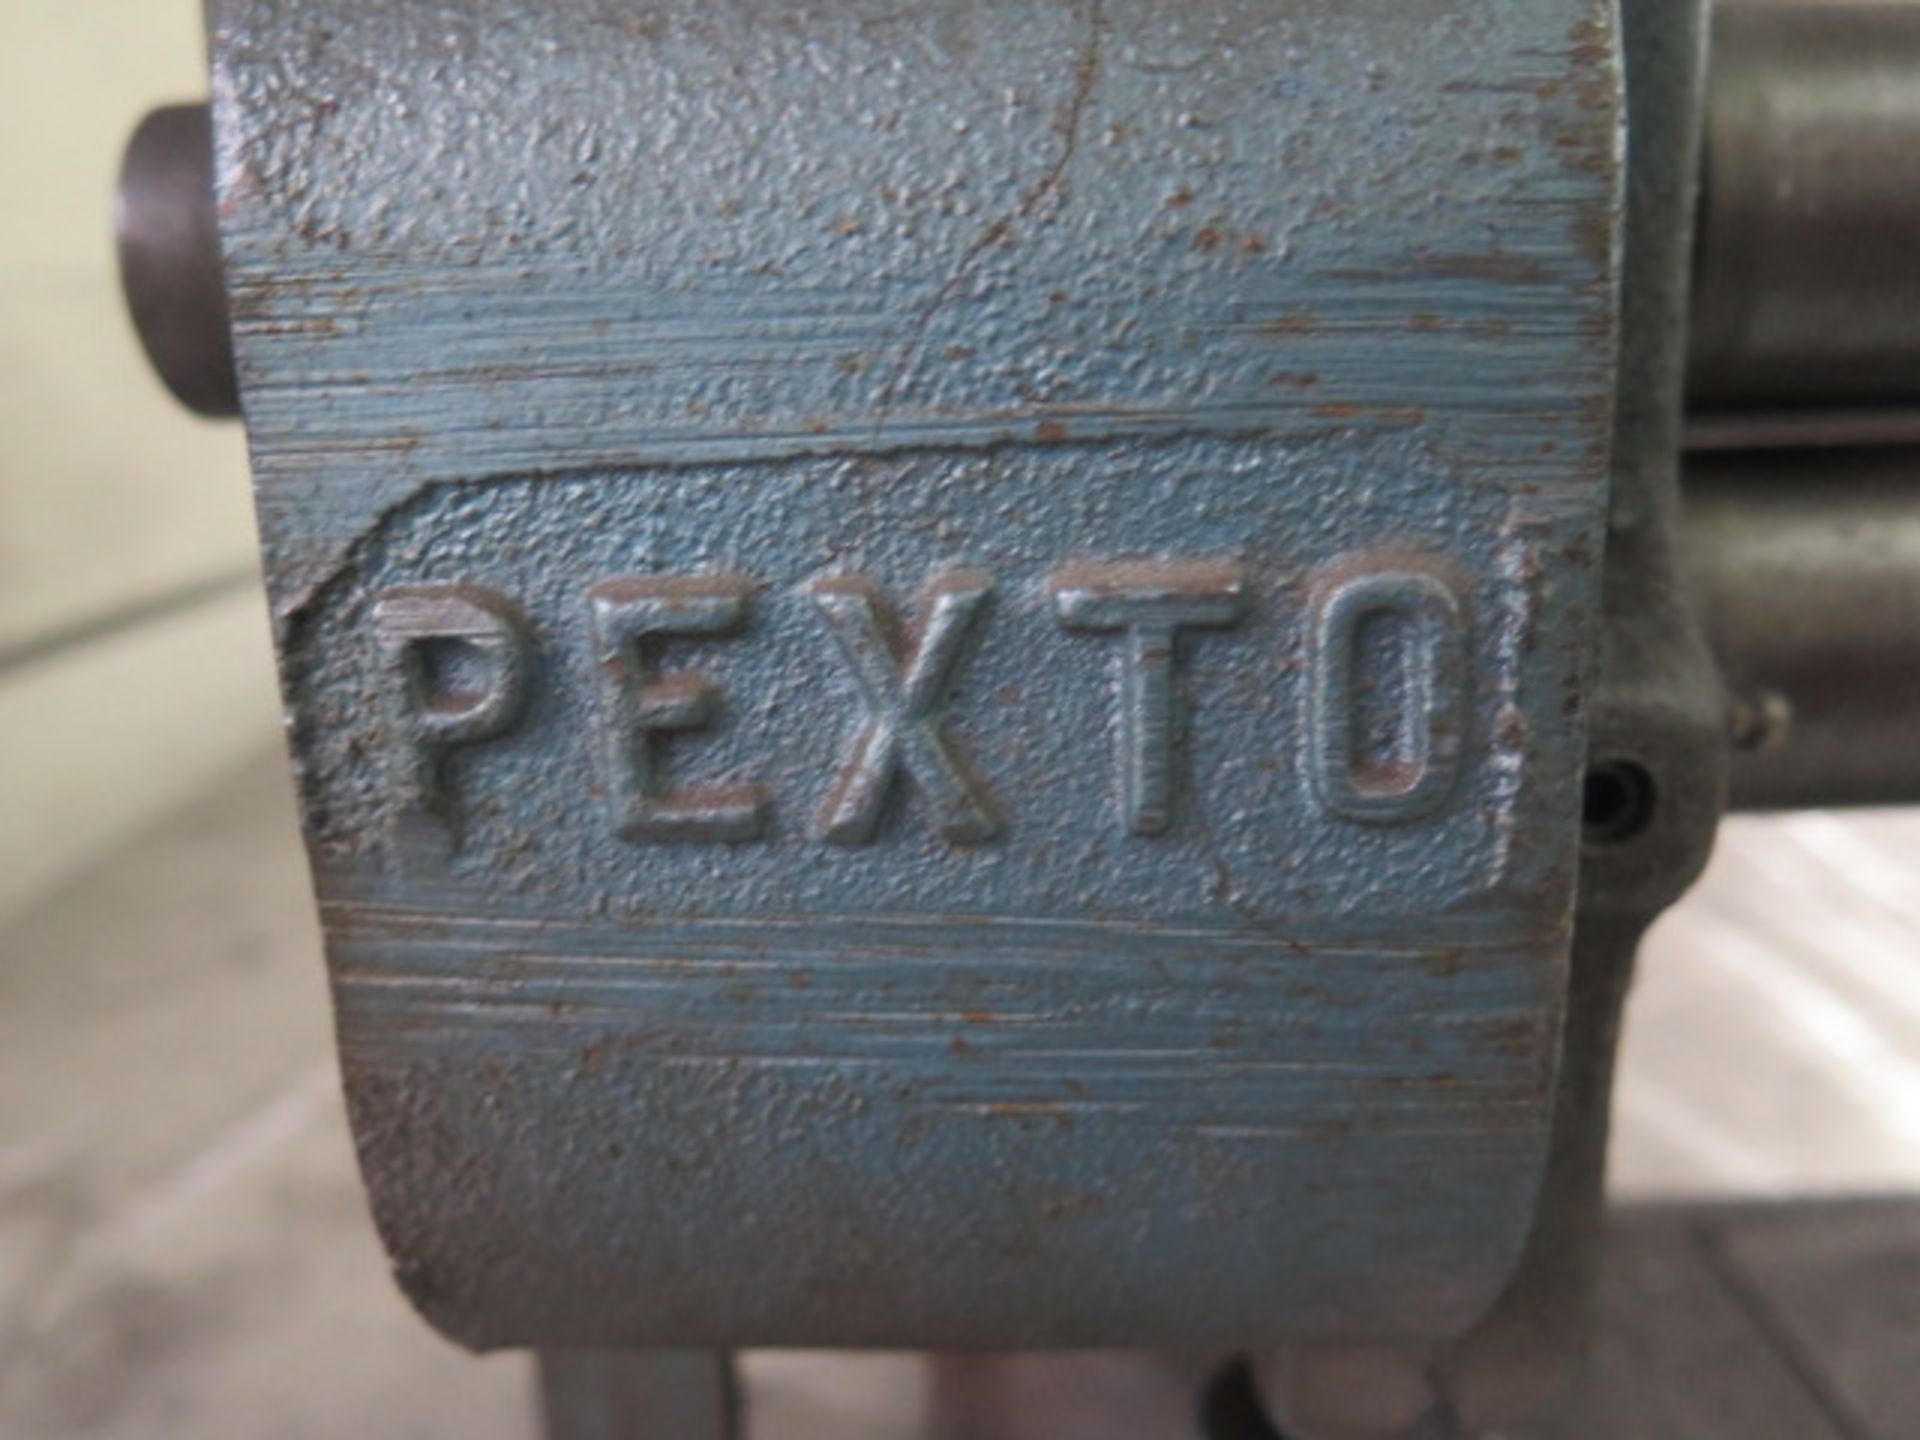 Pexto mdl. 383D 36" Hand Roll w/ 2" Rolls, Eron 6" Bench Vise w/ 48" x 80" x 3/4" Table, SOLD AS IS - Image 6 of 9